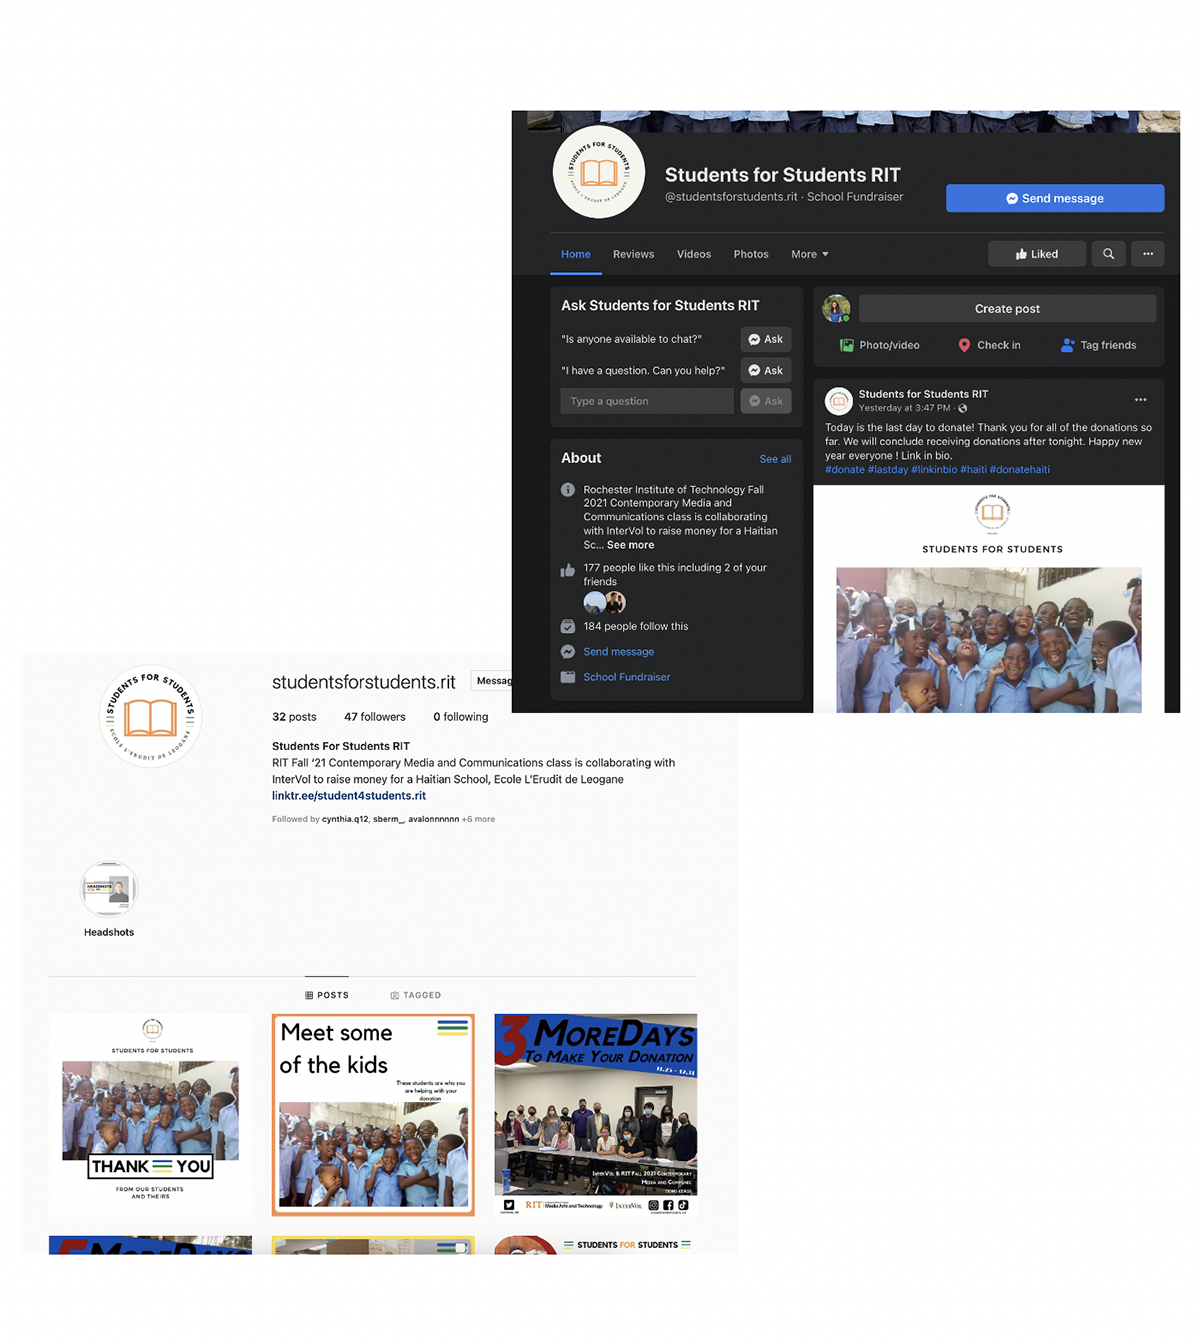 A screenshot of the social feeds for the Students for Students campaign.